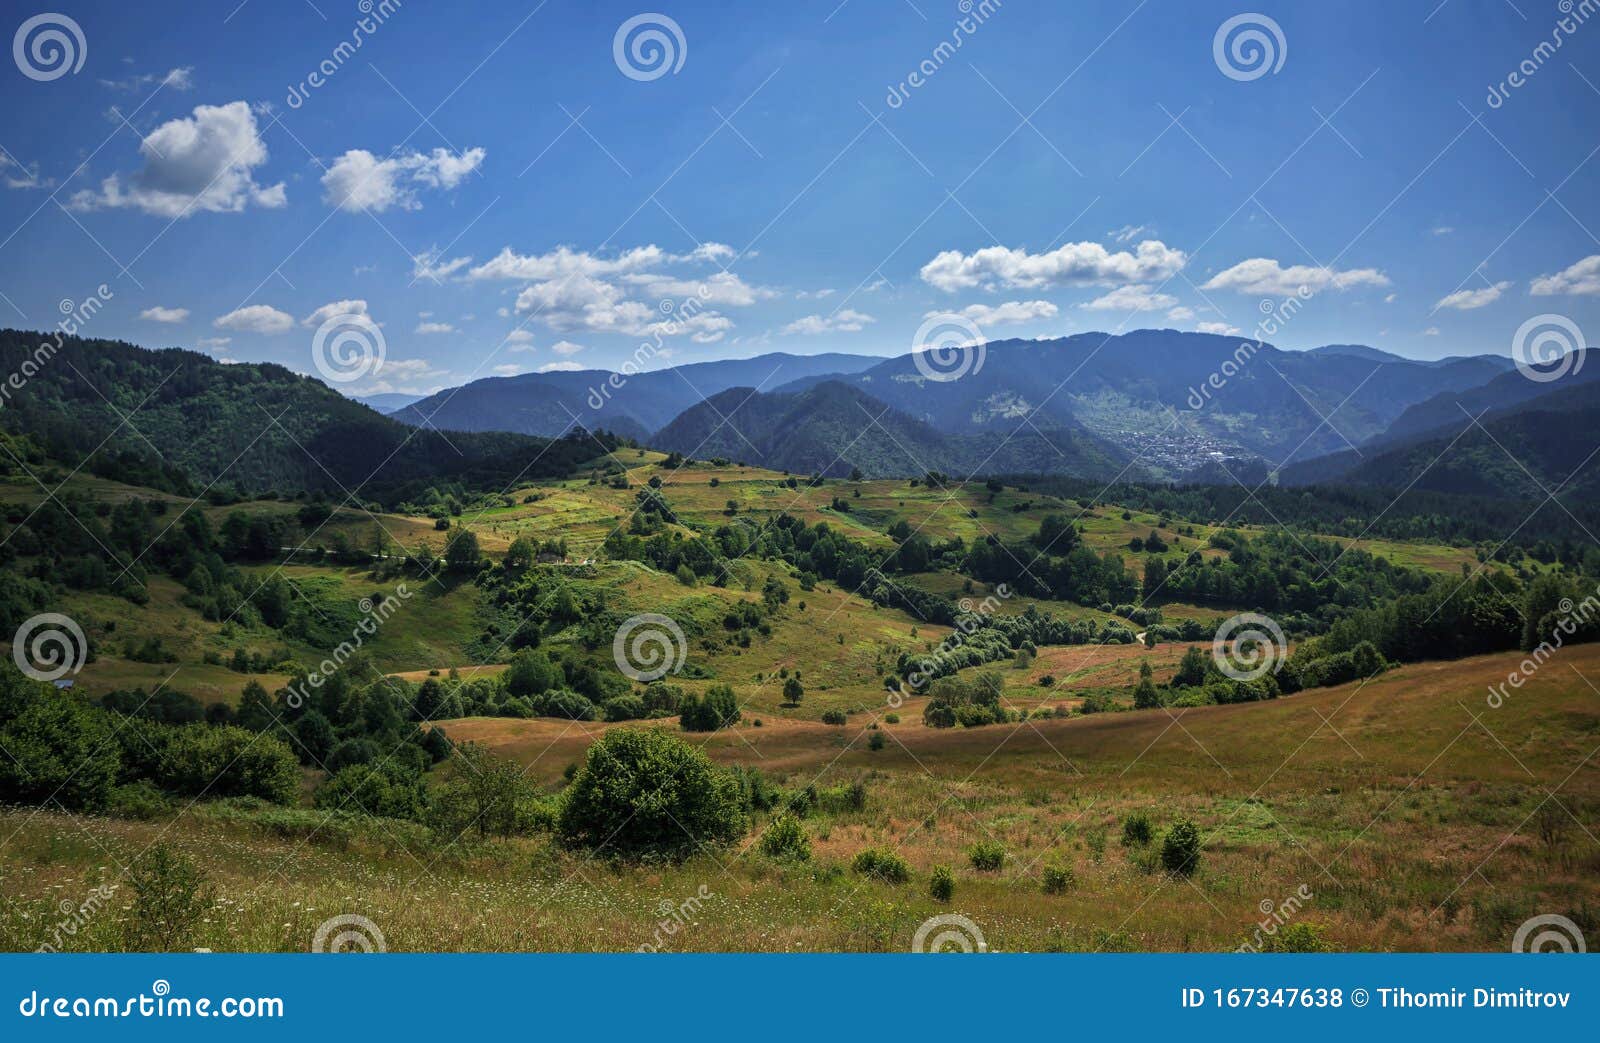 the surroundings of the village of chala in the rhodope mountains in bulgaria.